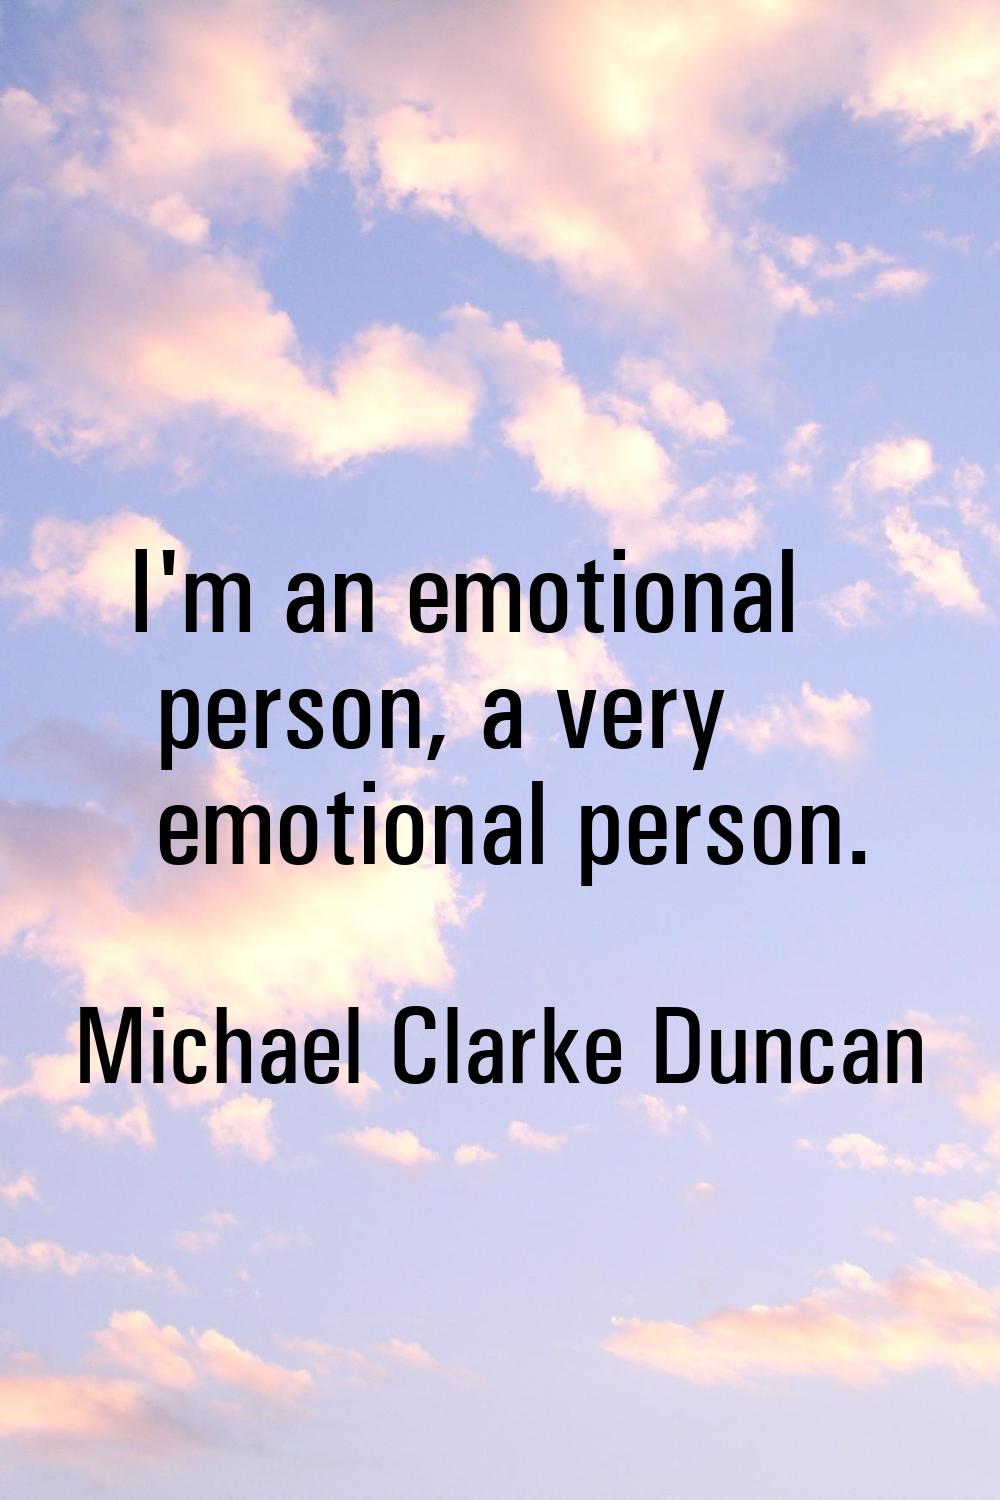 I'm an emotional person, a very emotional person.